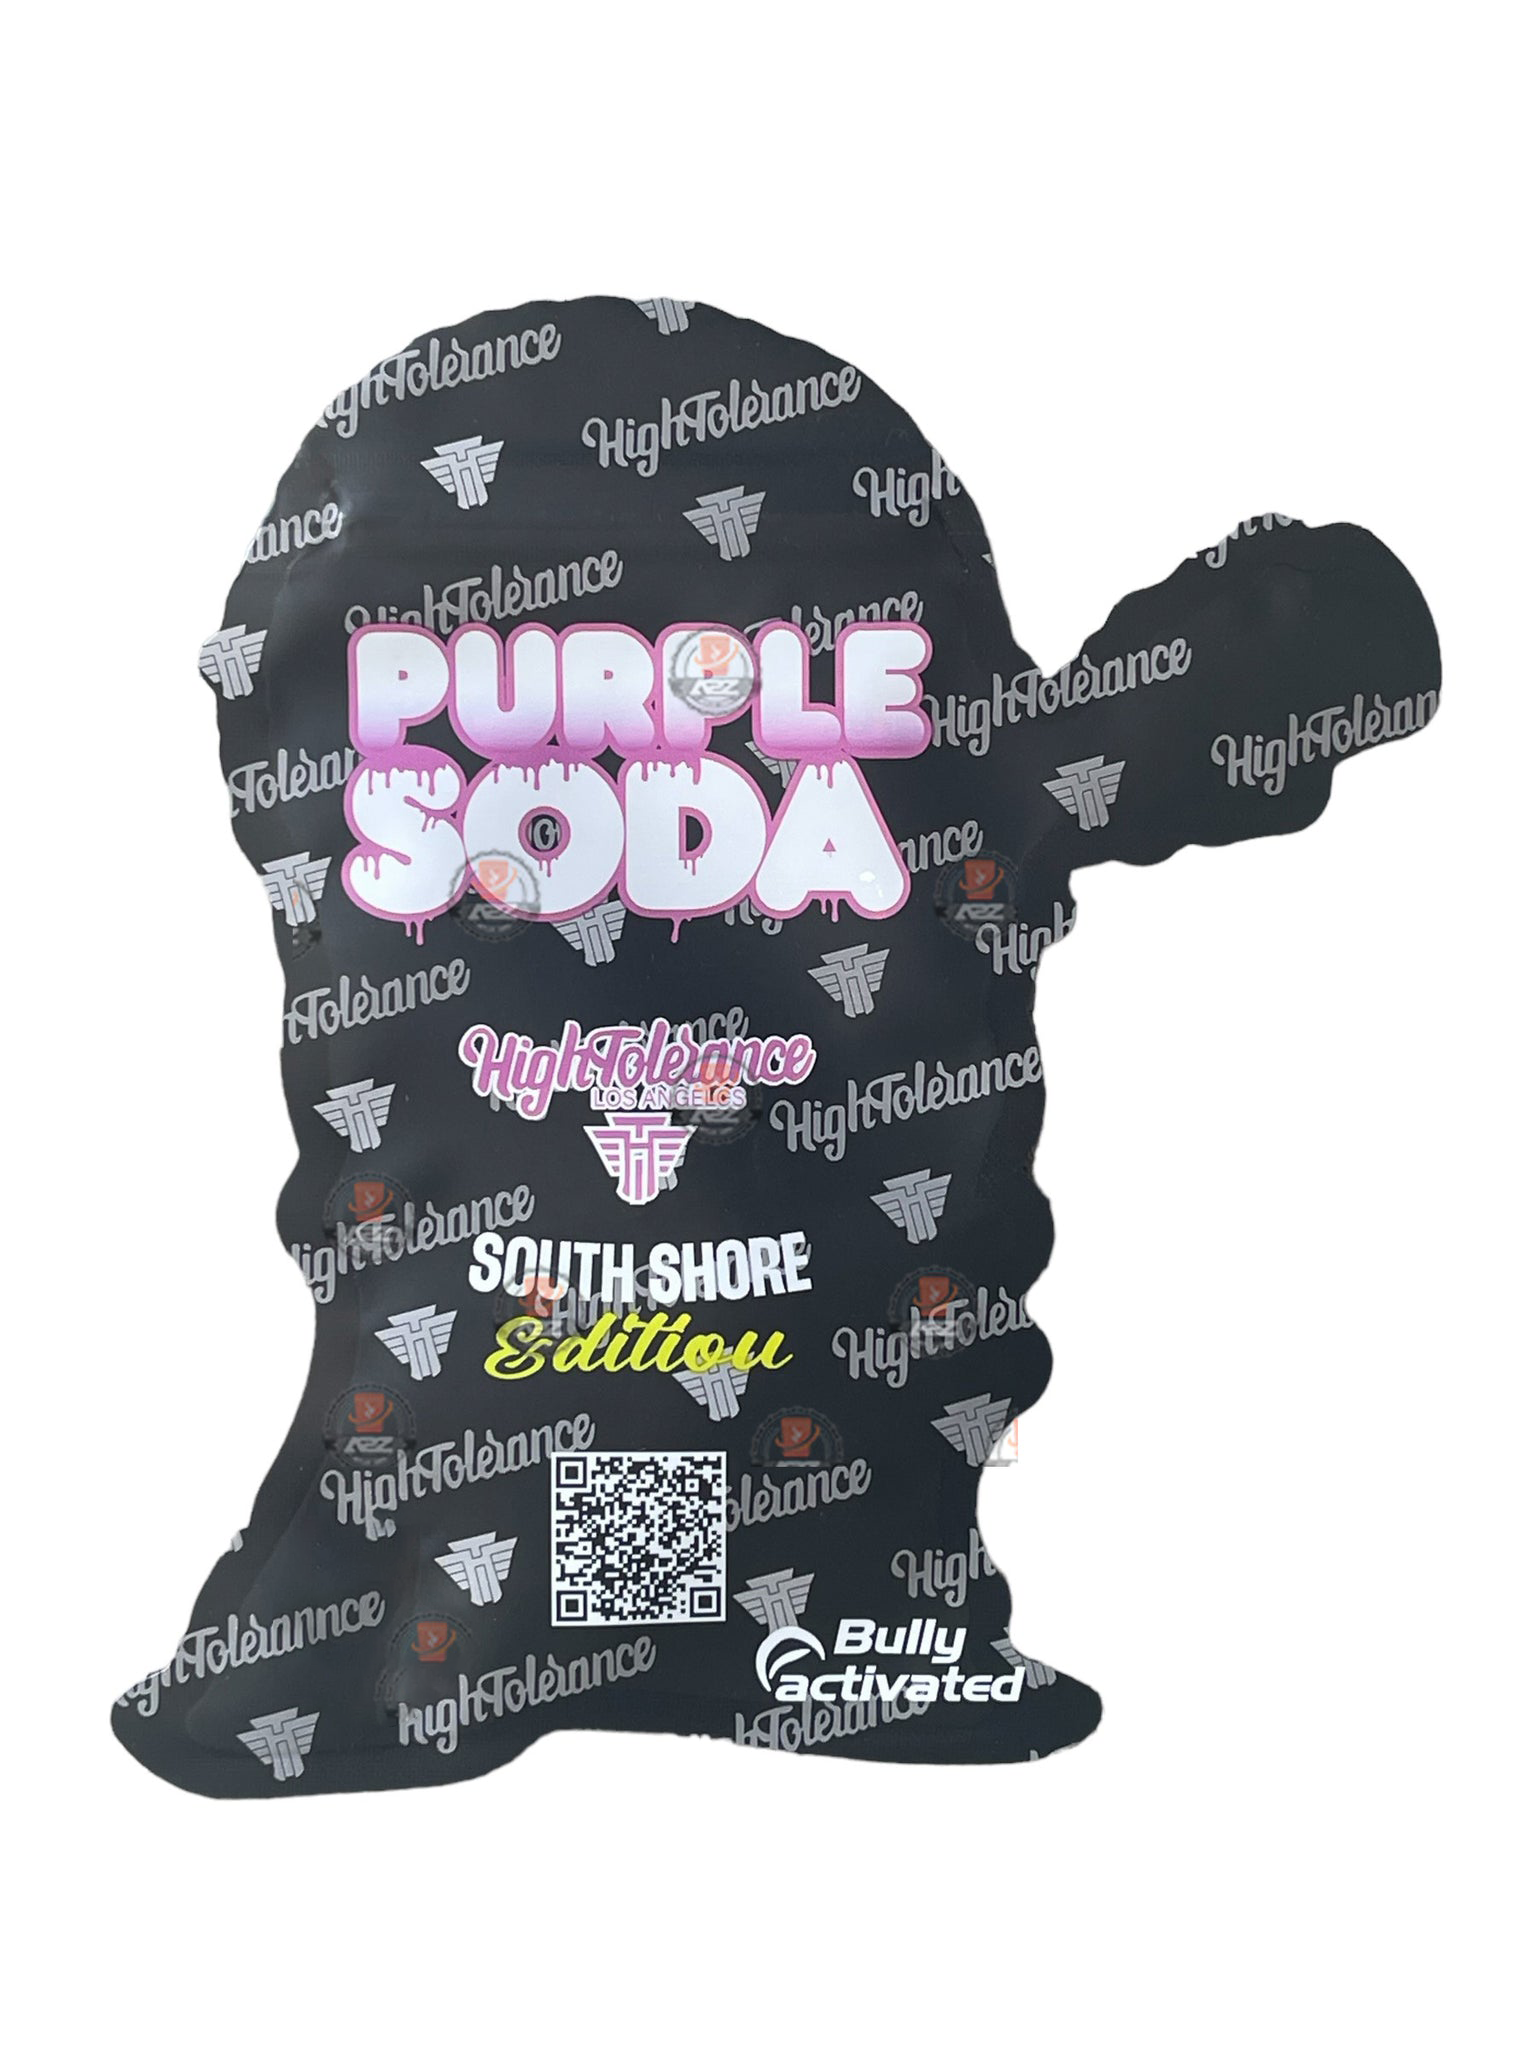 Purple Soda Cut Out Mylar Bags 3.5g Hight Tolerance South Shore Edition